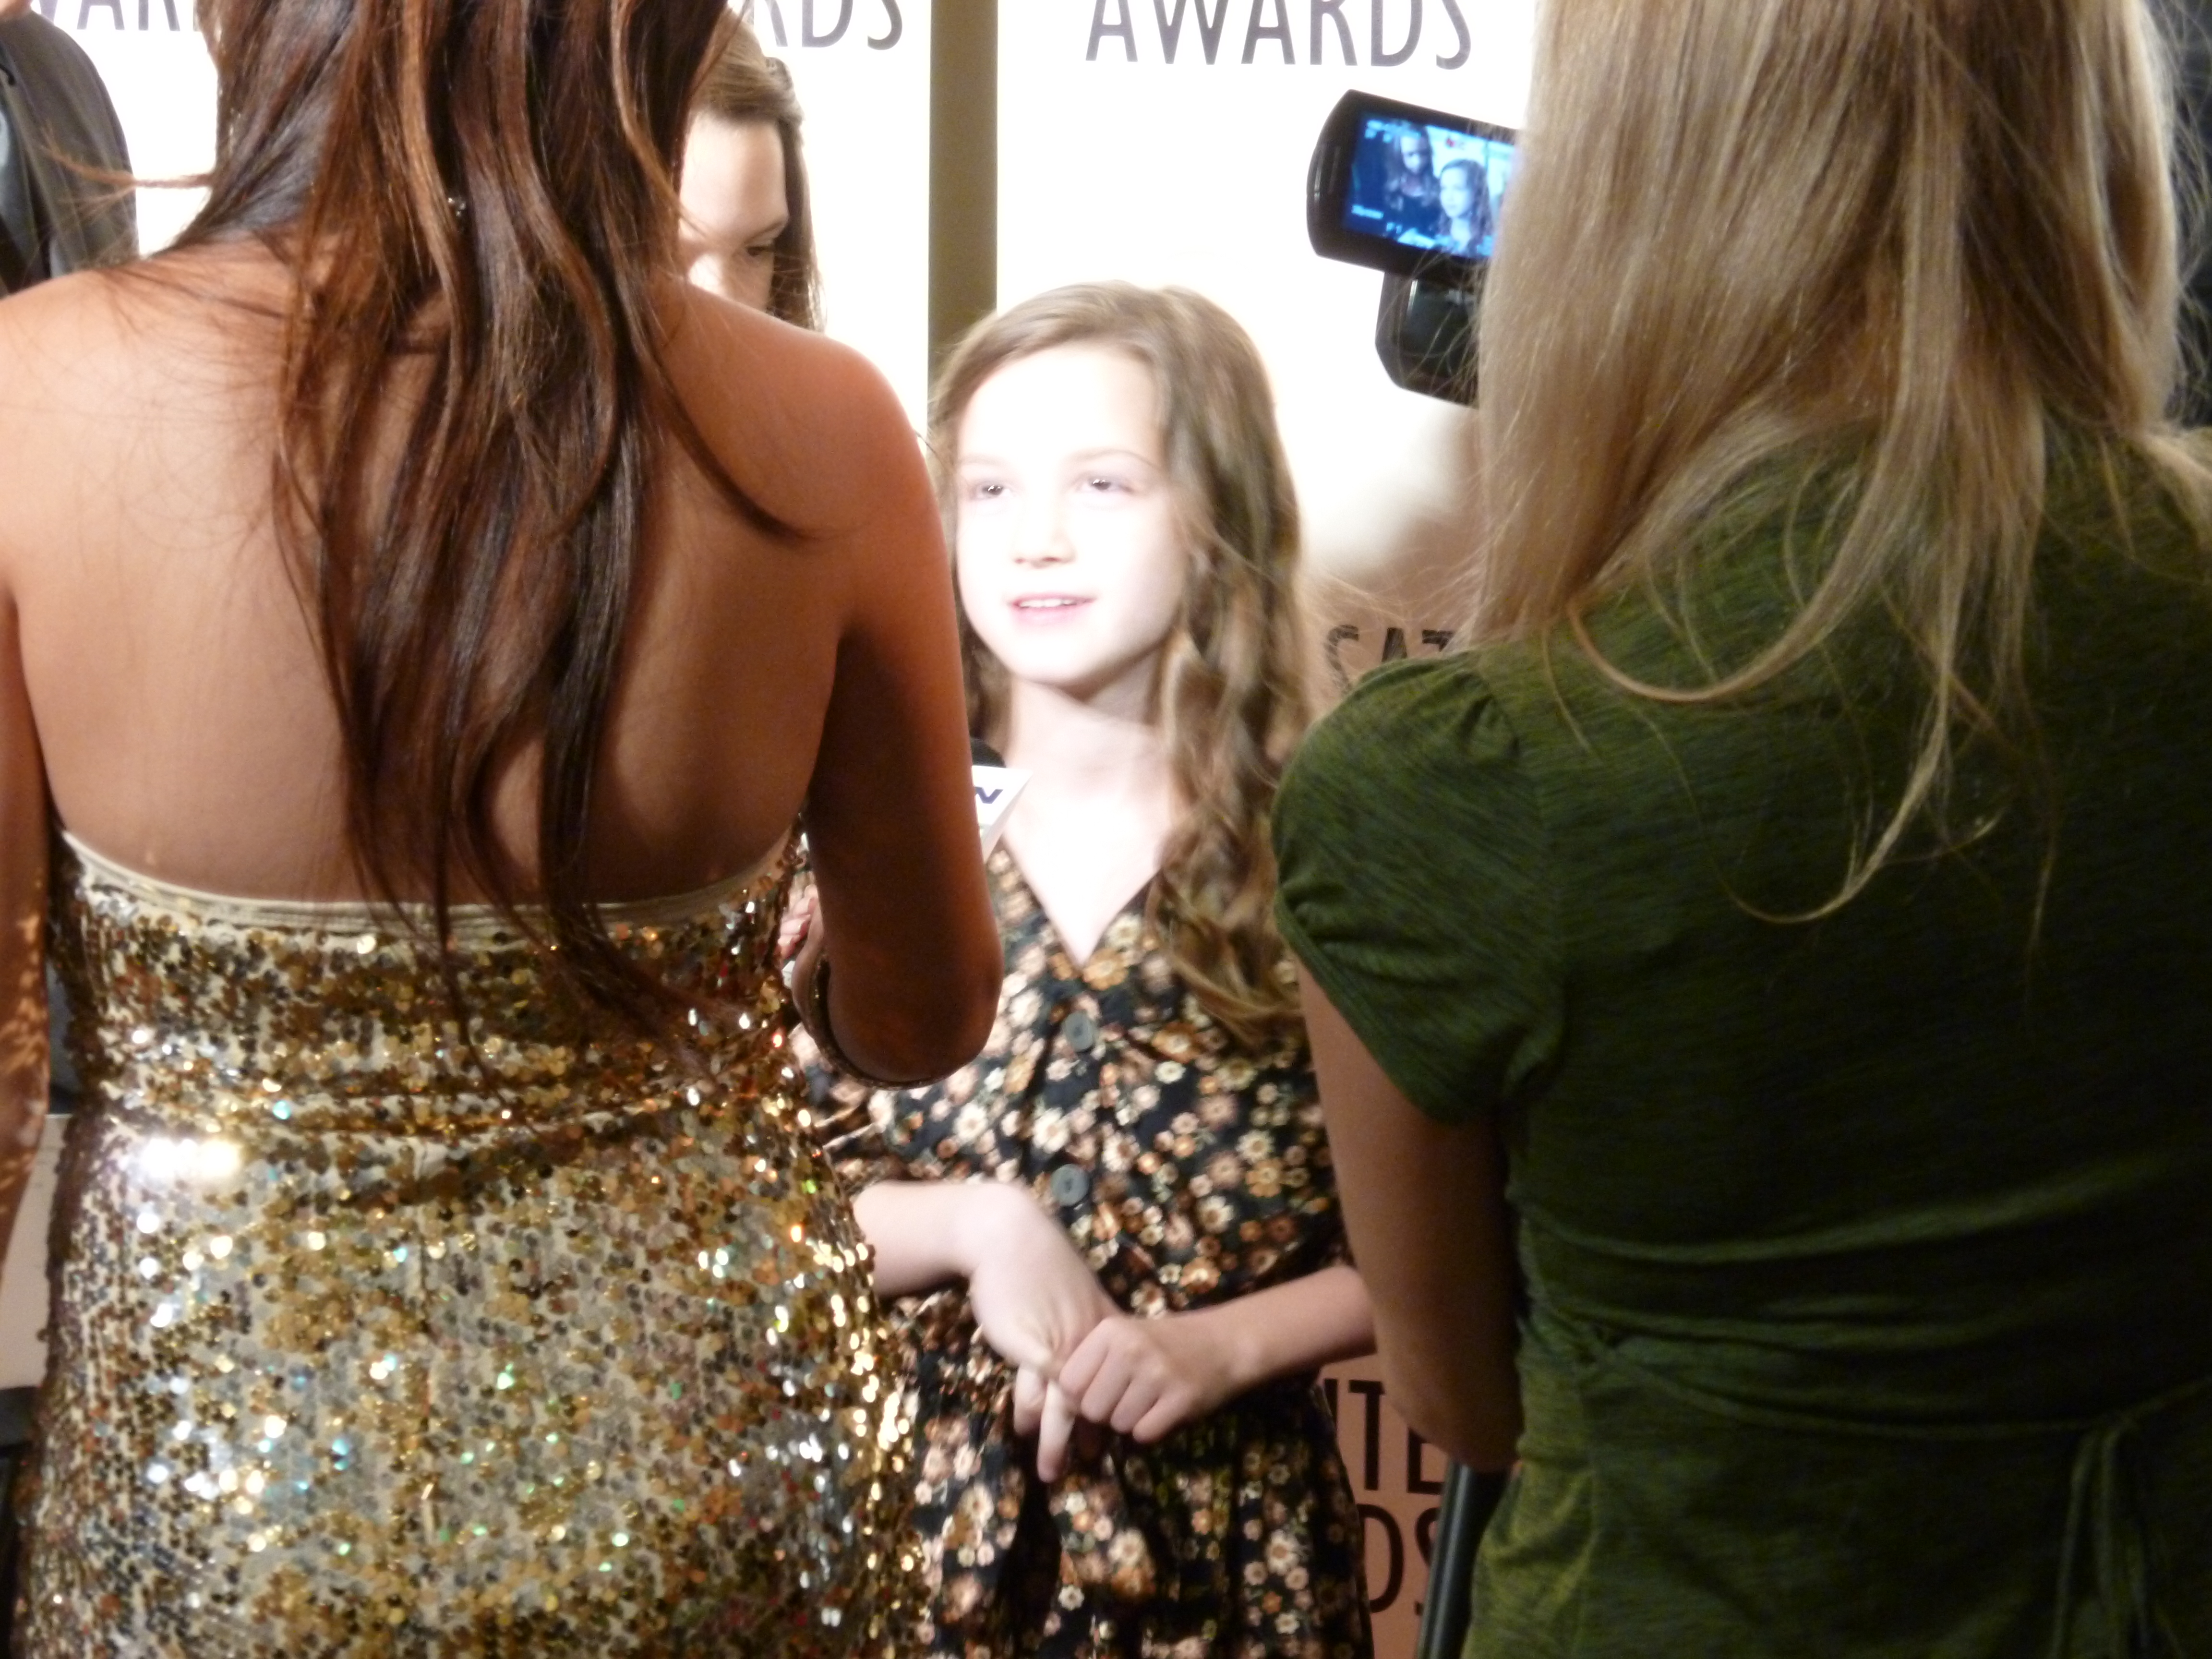 Olivia Shea on the Red Carpet at the 2011 Satellite Awards.